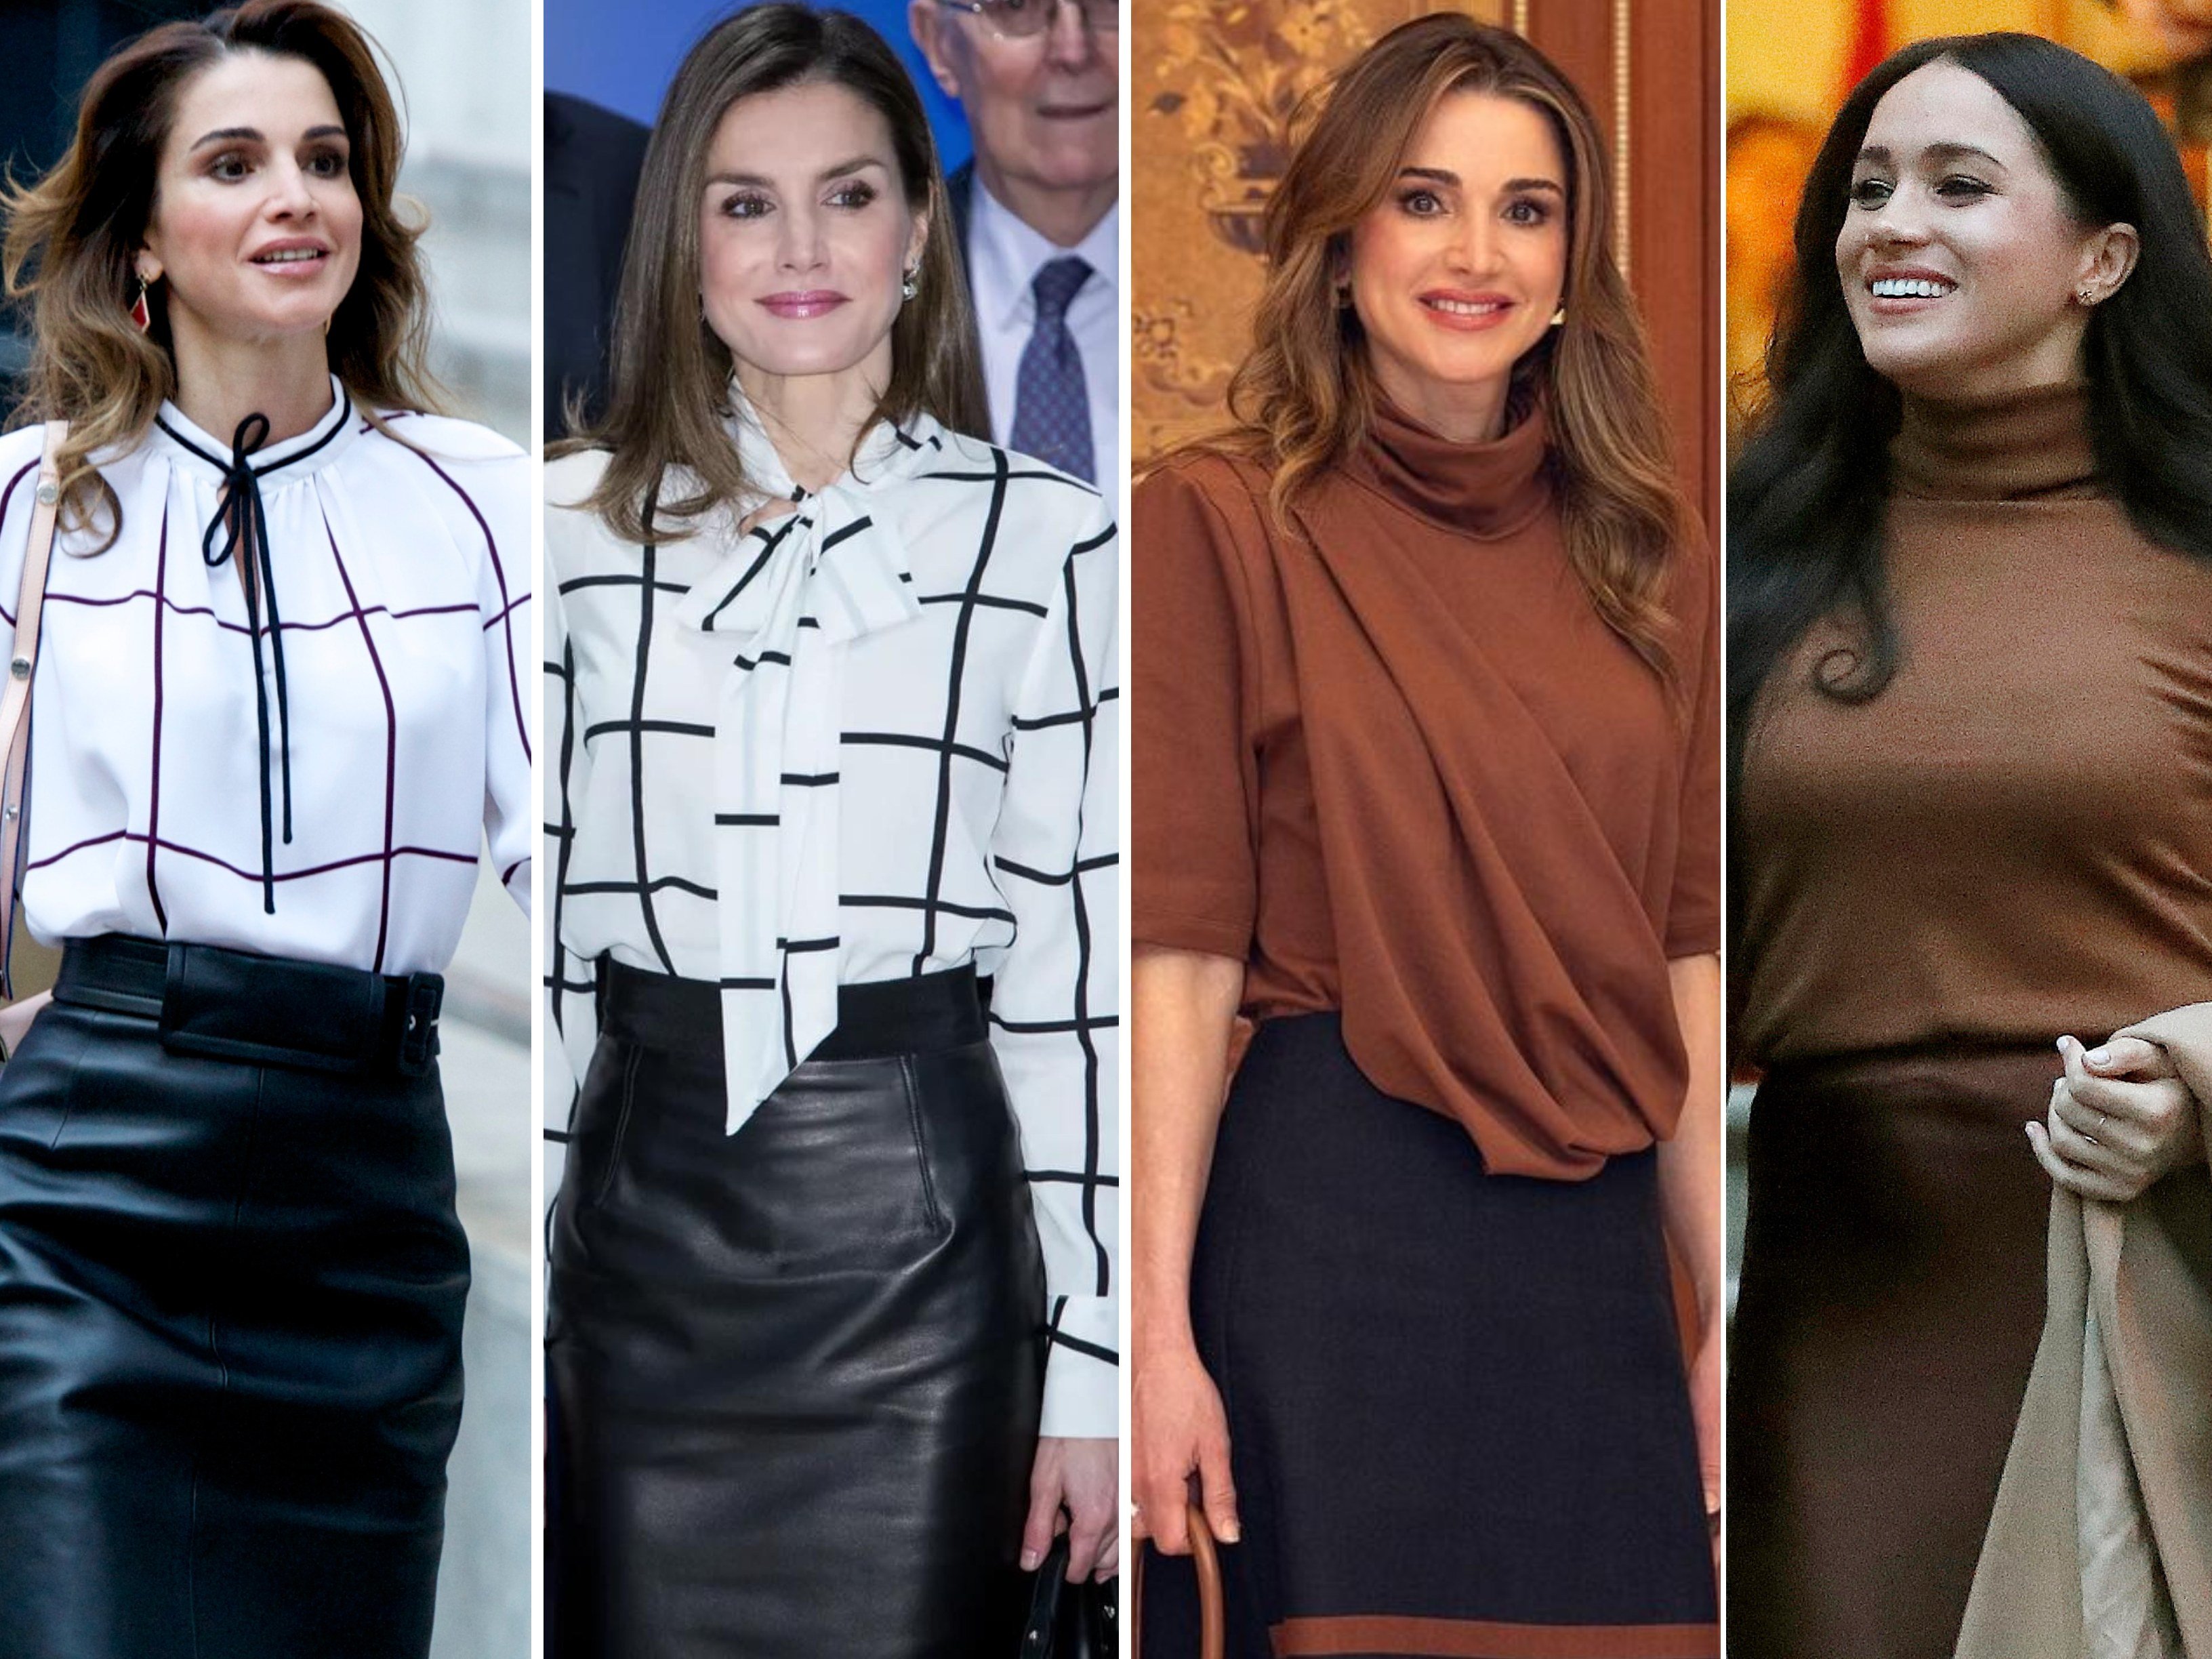 Fame, set and match: Queen Letizia of Spain and Meghan Markle are among the stylish royals who wore the same outfits as Queen Rania of Jordan. Photos: Getty Images, Facebook, @queenrania/Instagram, AP